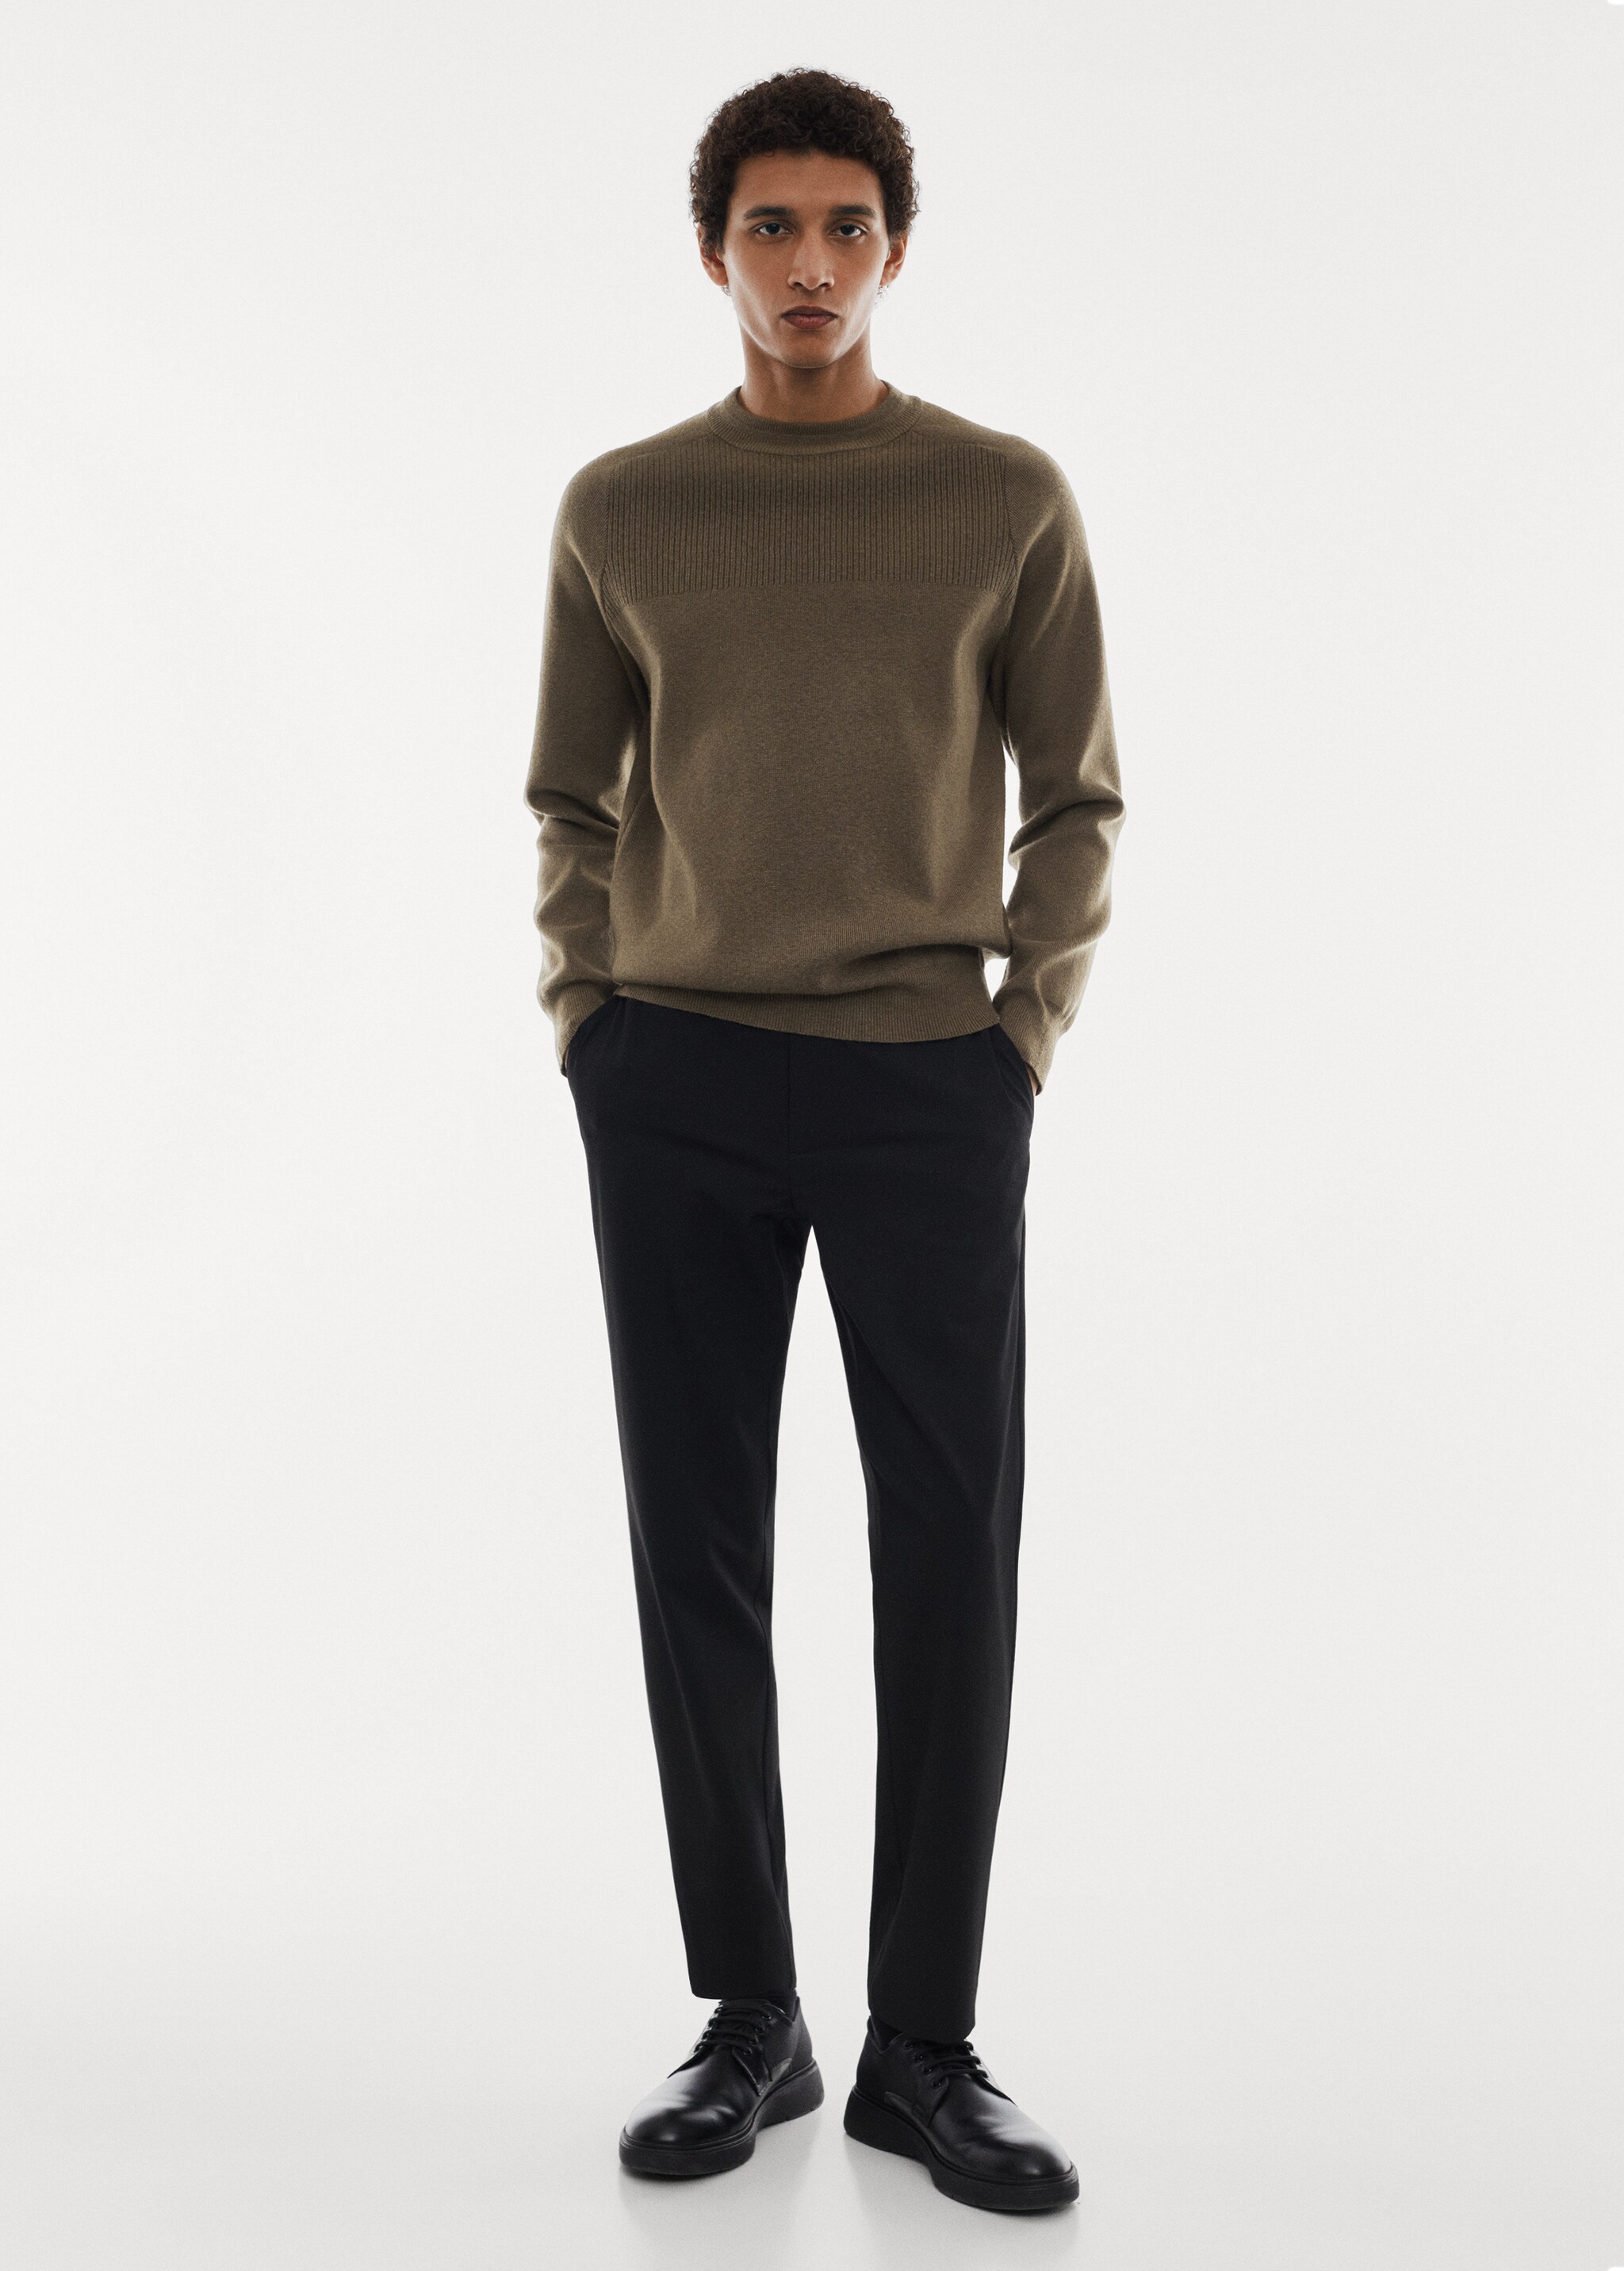 Stretch sweater with ribbed detail - General plane